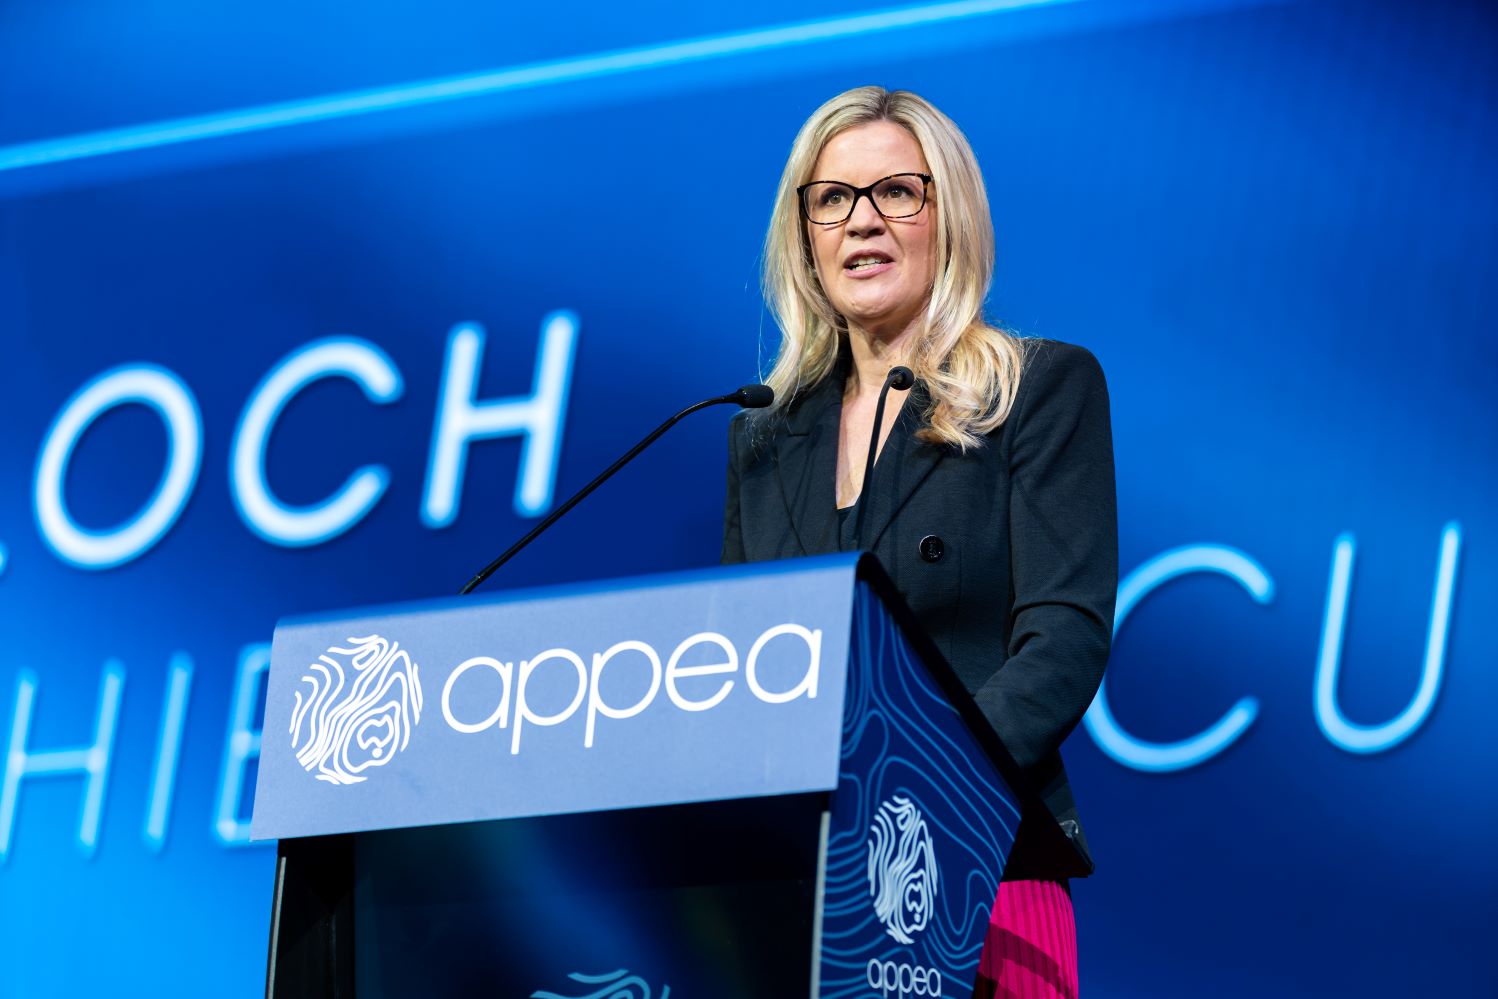 Speech: APPEA Chief Executive Samantha McCulloch closing address to the APPEA 2023 Conference & Exhibition